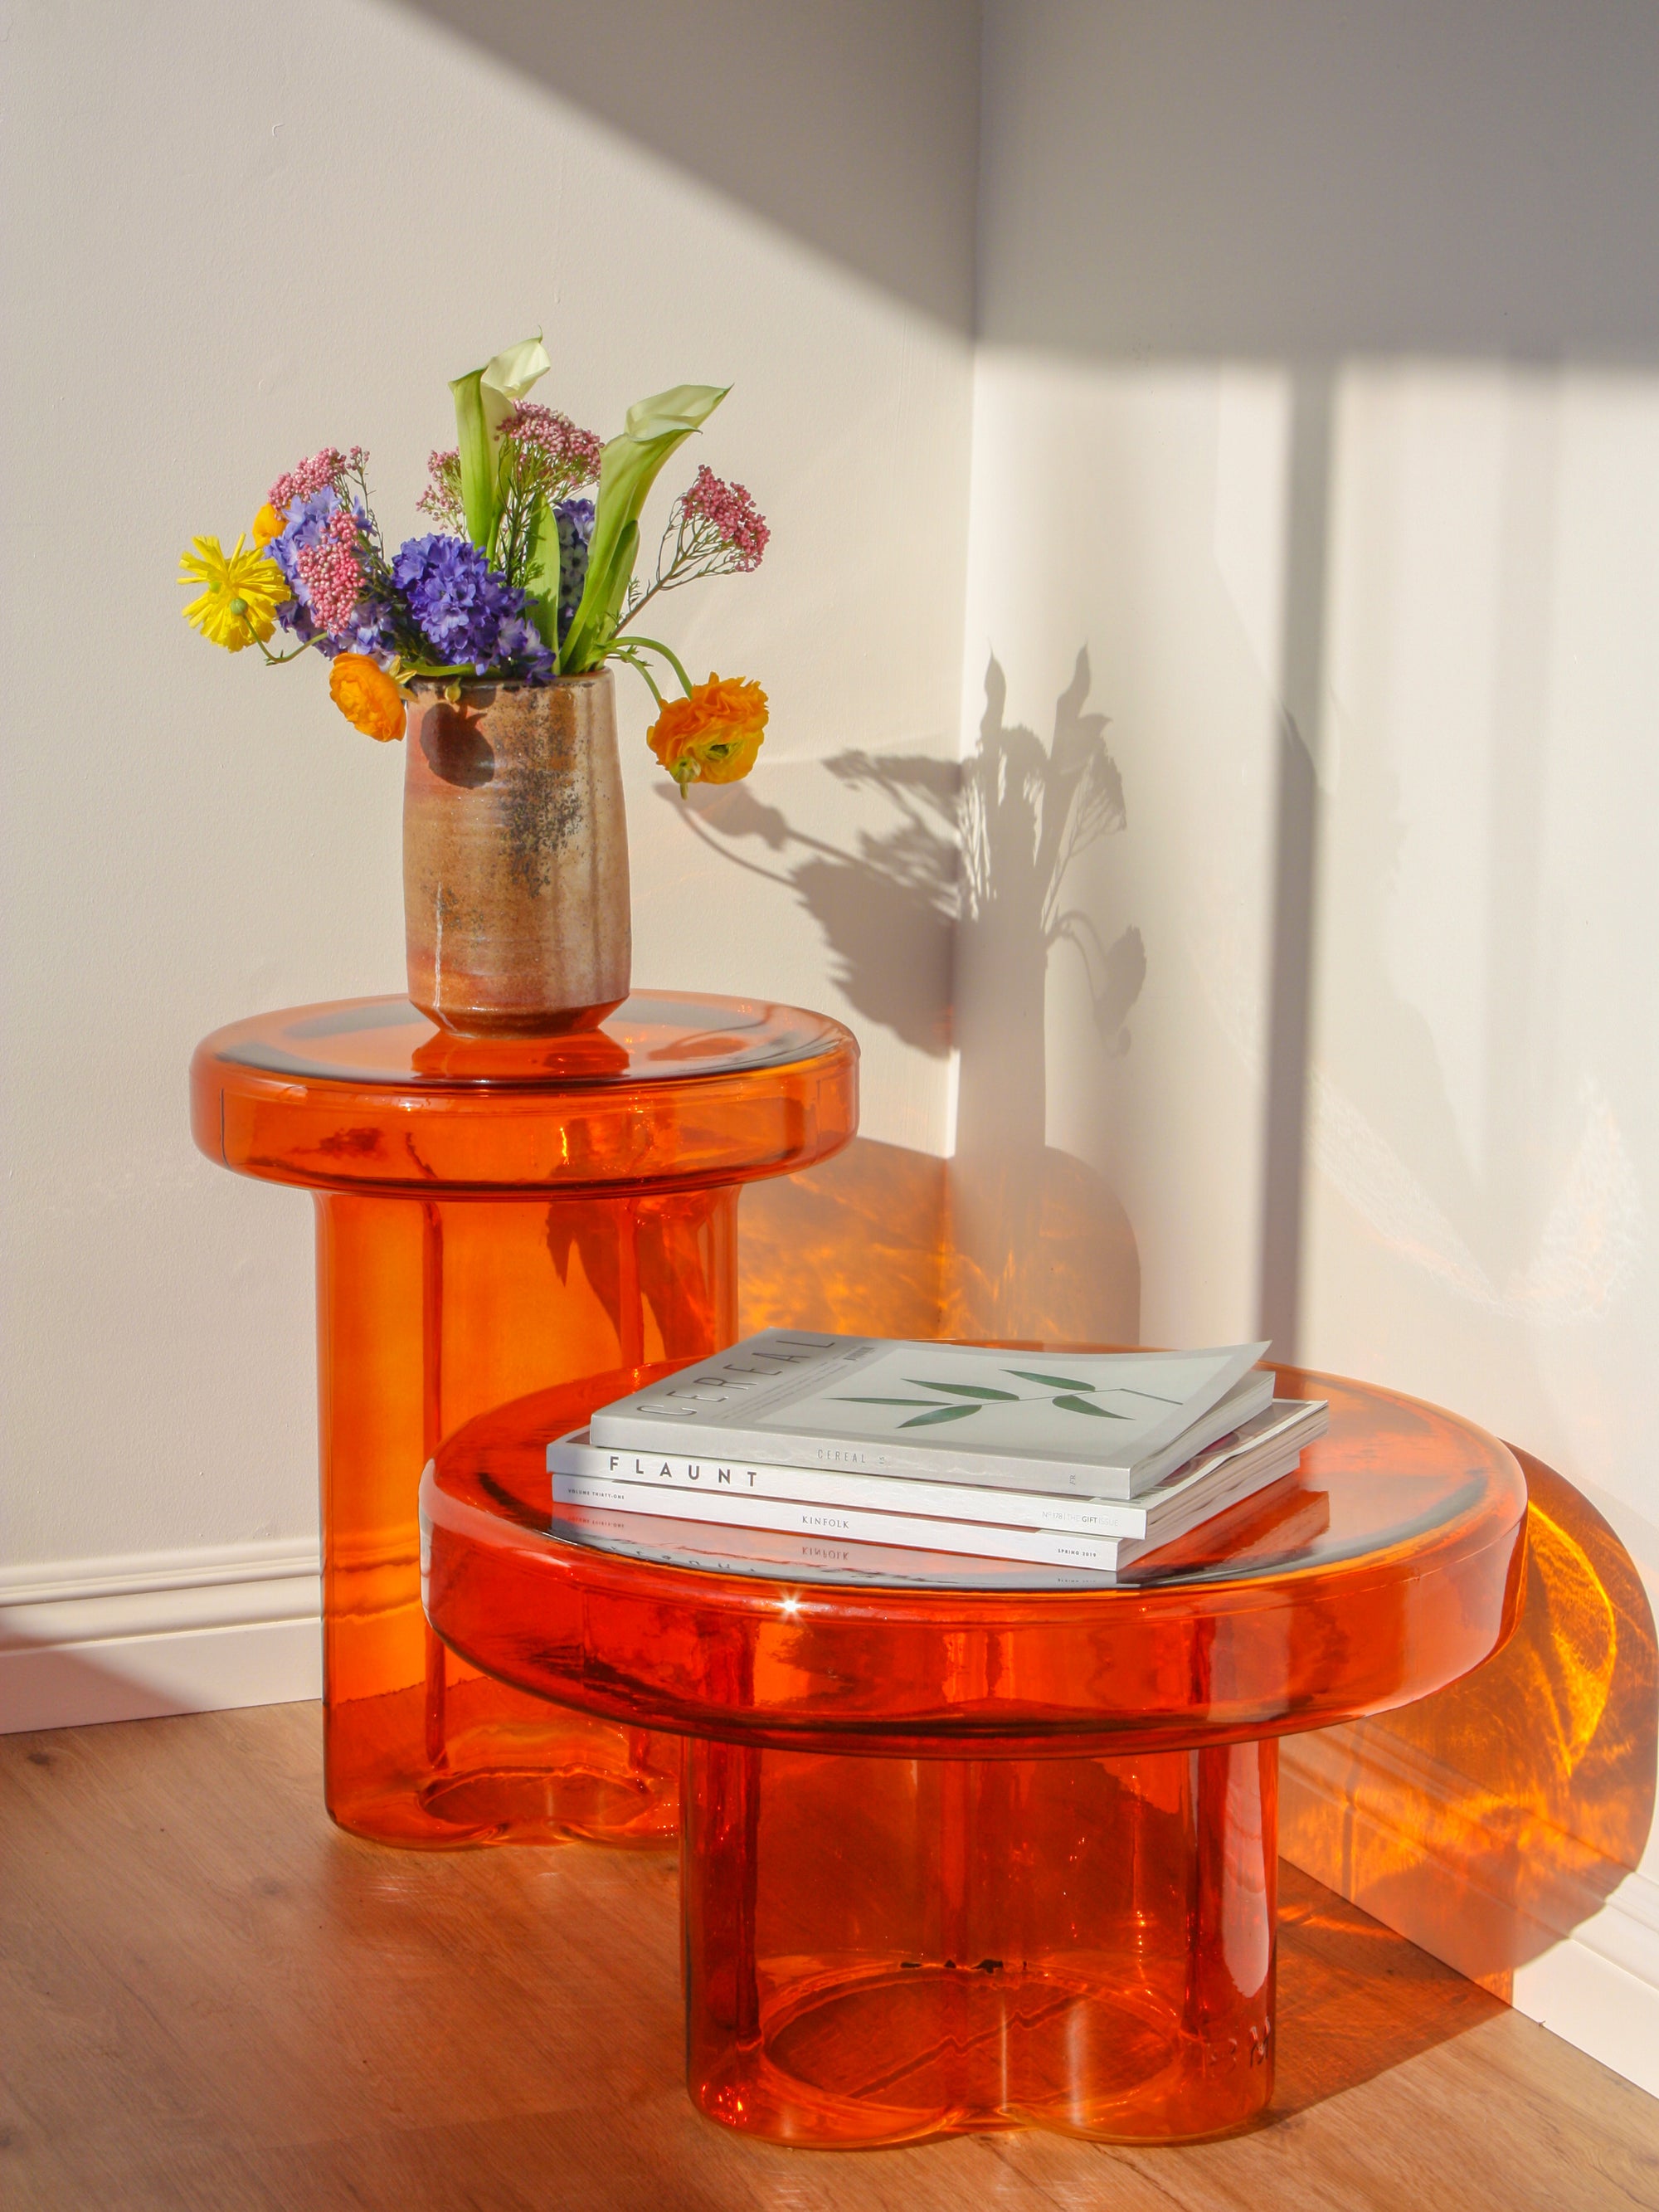 Glass Soda End Table Dupe - Miniforms Coffee Table Dupe - Orange, Skinny Glass Pedestal Coffee Table